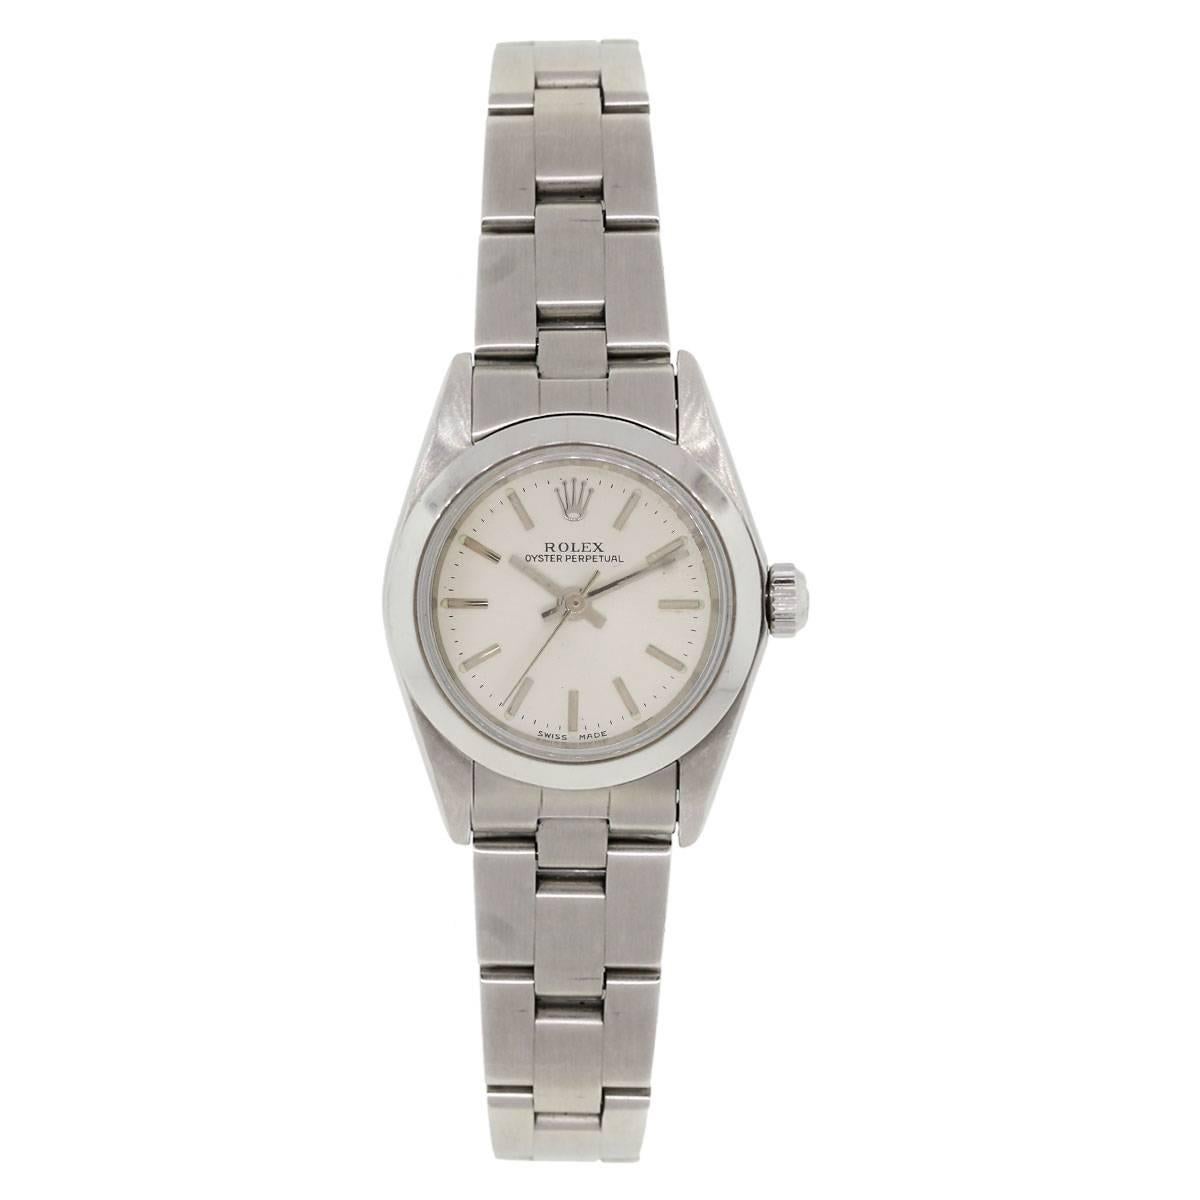 Brand: Rolex
MPN: 76080
Model: Oyster Perpetual (non date)
Case Material: Stainless steel
Case Diameter: 24mm
Crystal: Scratch resistant sapphire
Bezel: Smooth stainless steel bezel
Dial: Silver non date dial with silver stick hour markers
Bracelet: